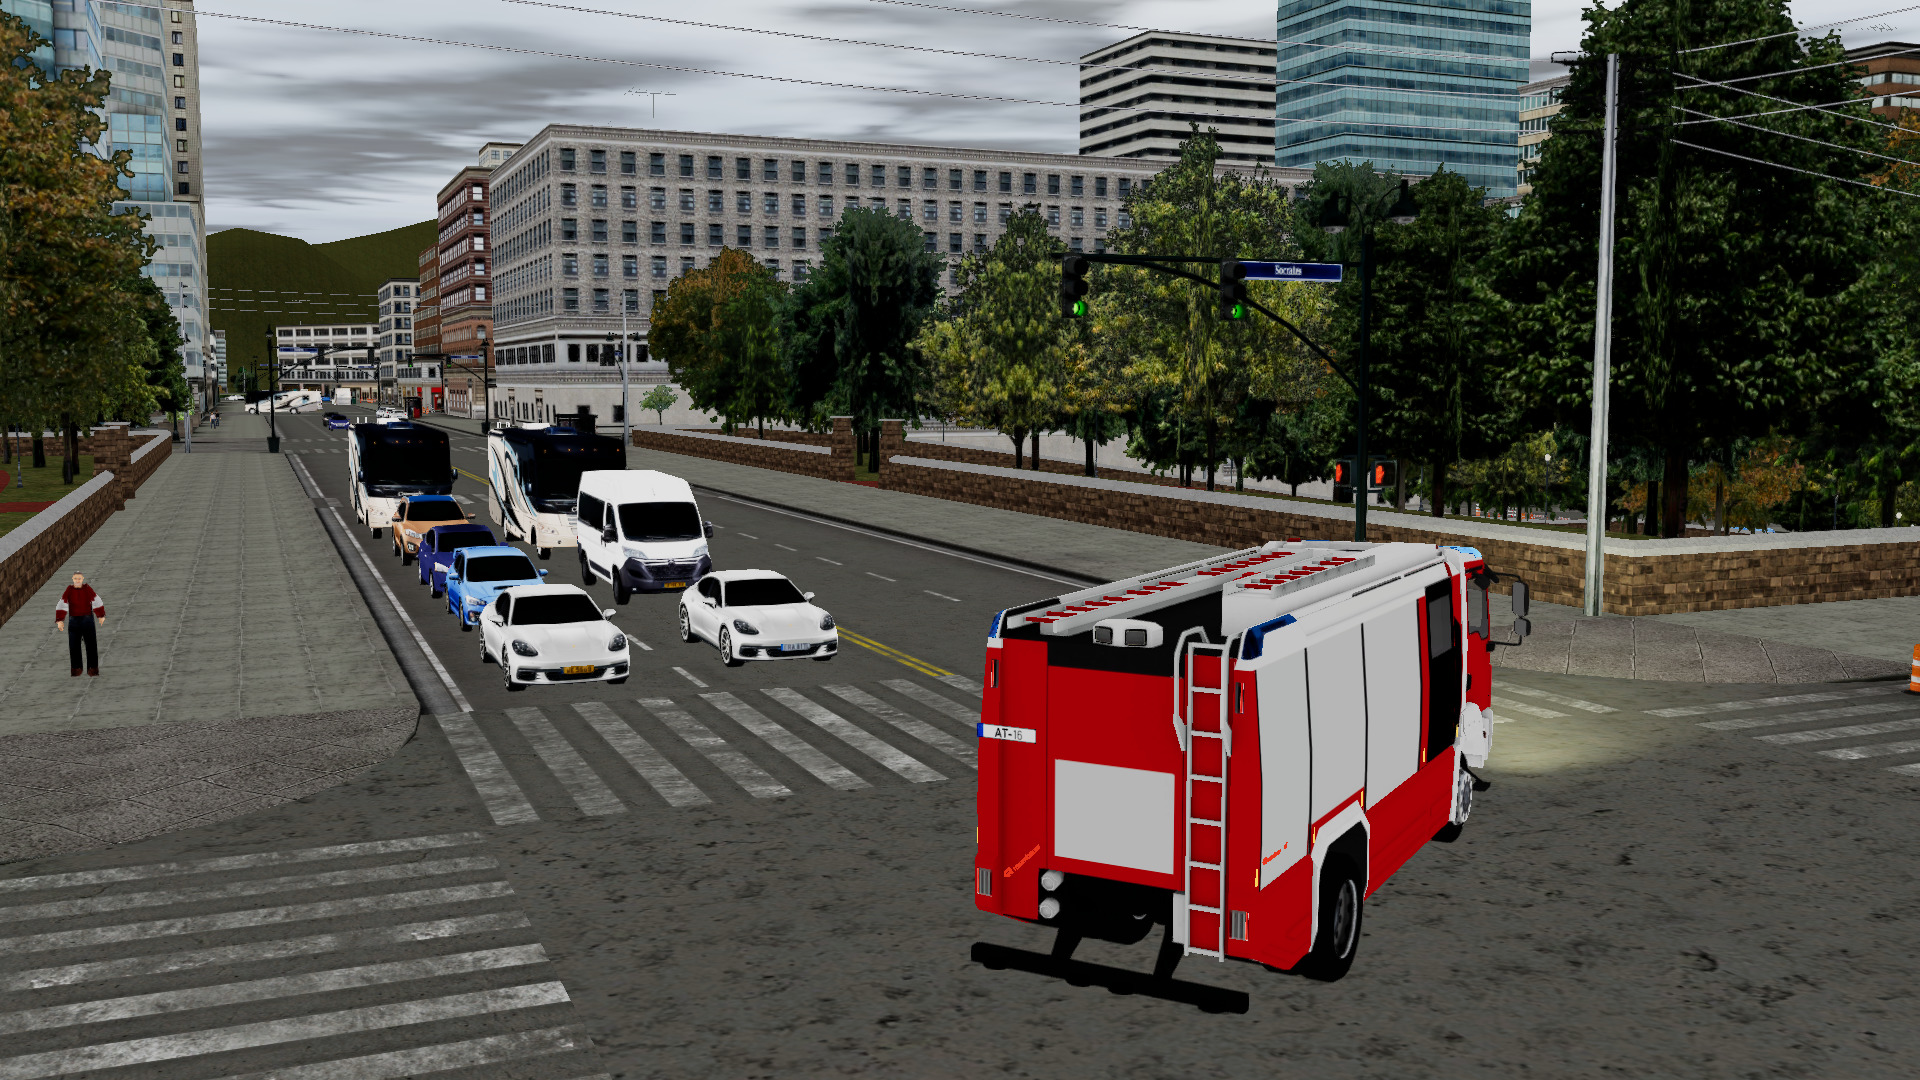 Interactive traffic responding to the fire truck driving safely and swiftly over the crossing towards the incident location.